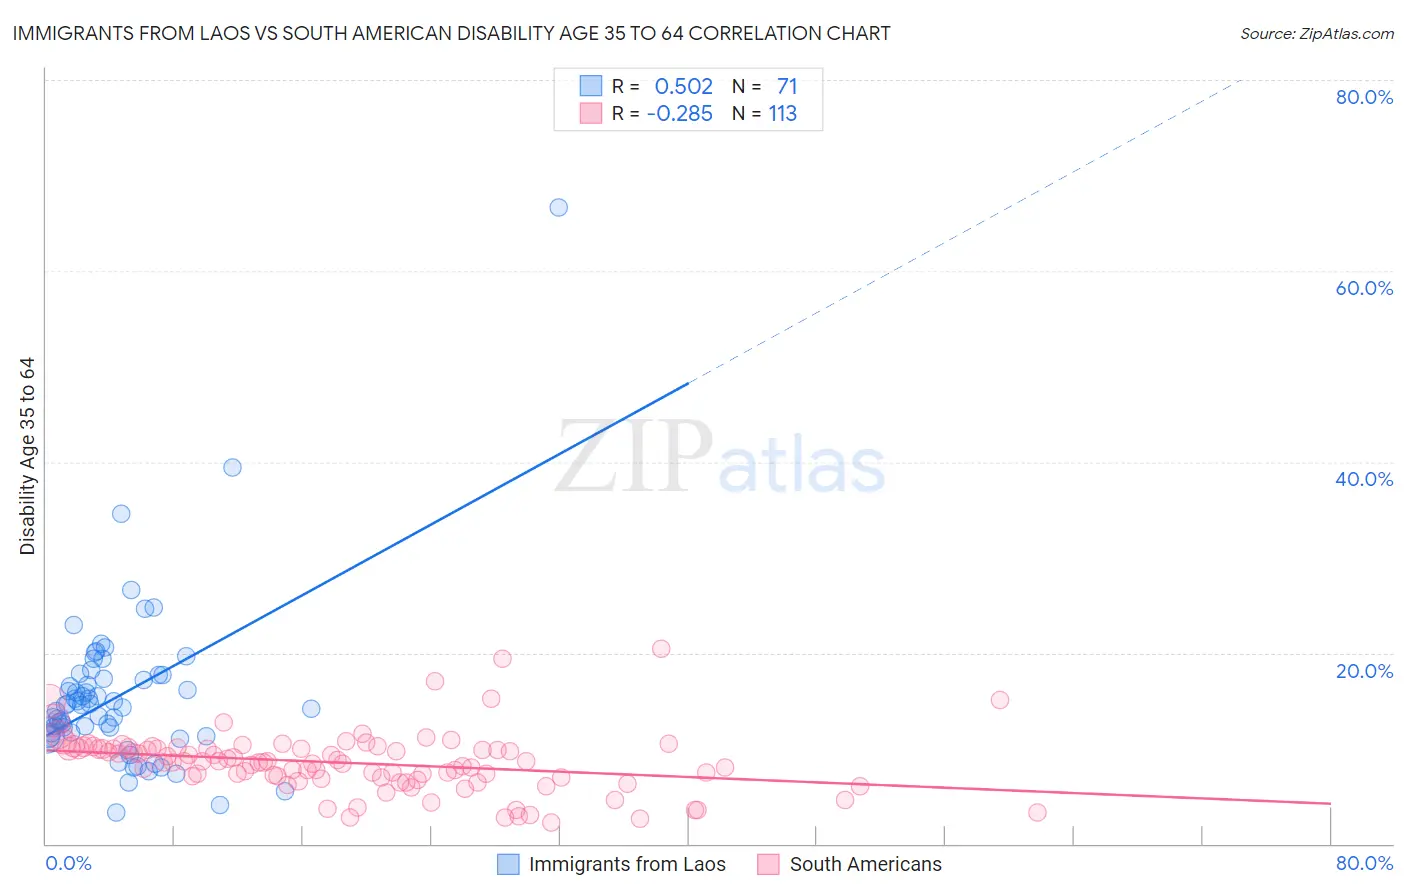 Immigrants from Laos vs South American Disability Age 35 to 64